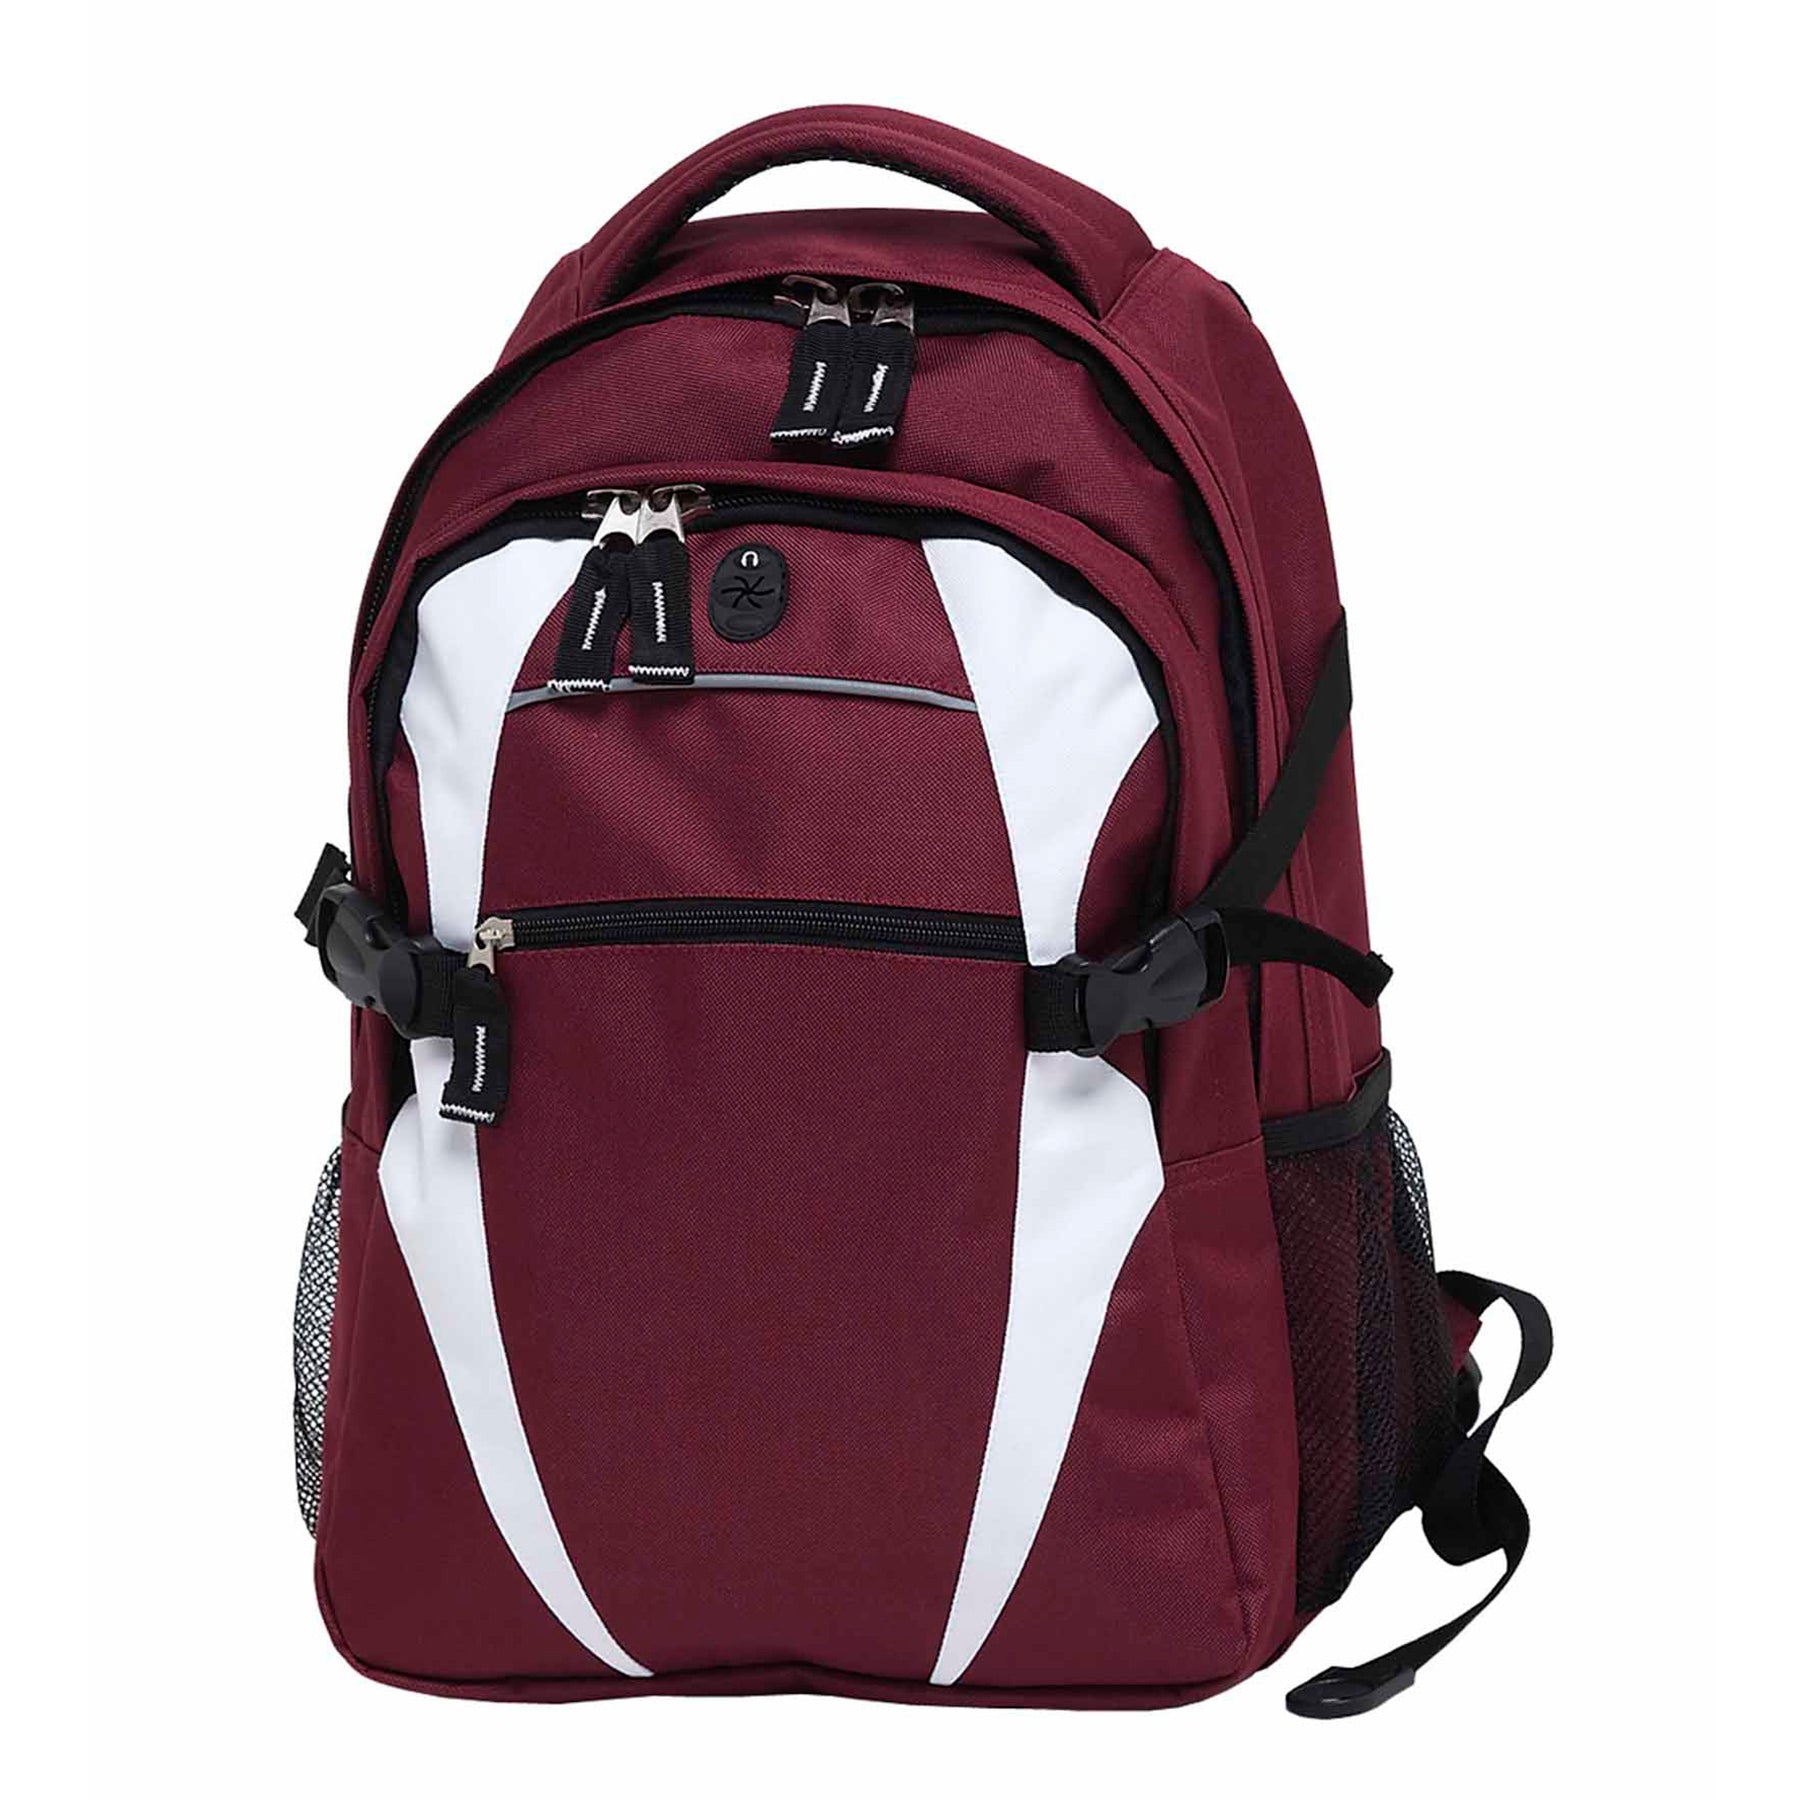 House of Uniforms The Spliced Zenith Backpack Gear for Life Maroon/White